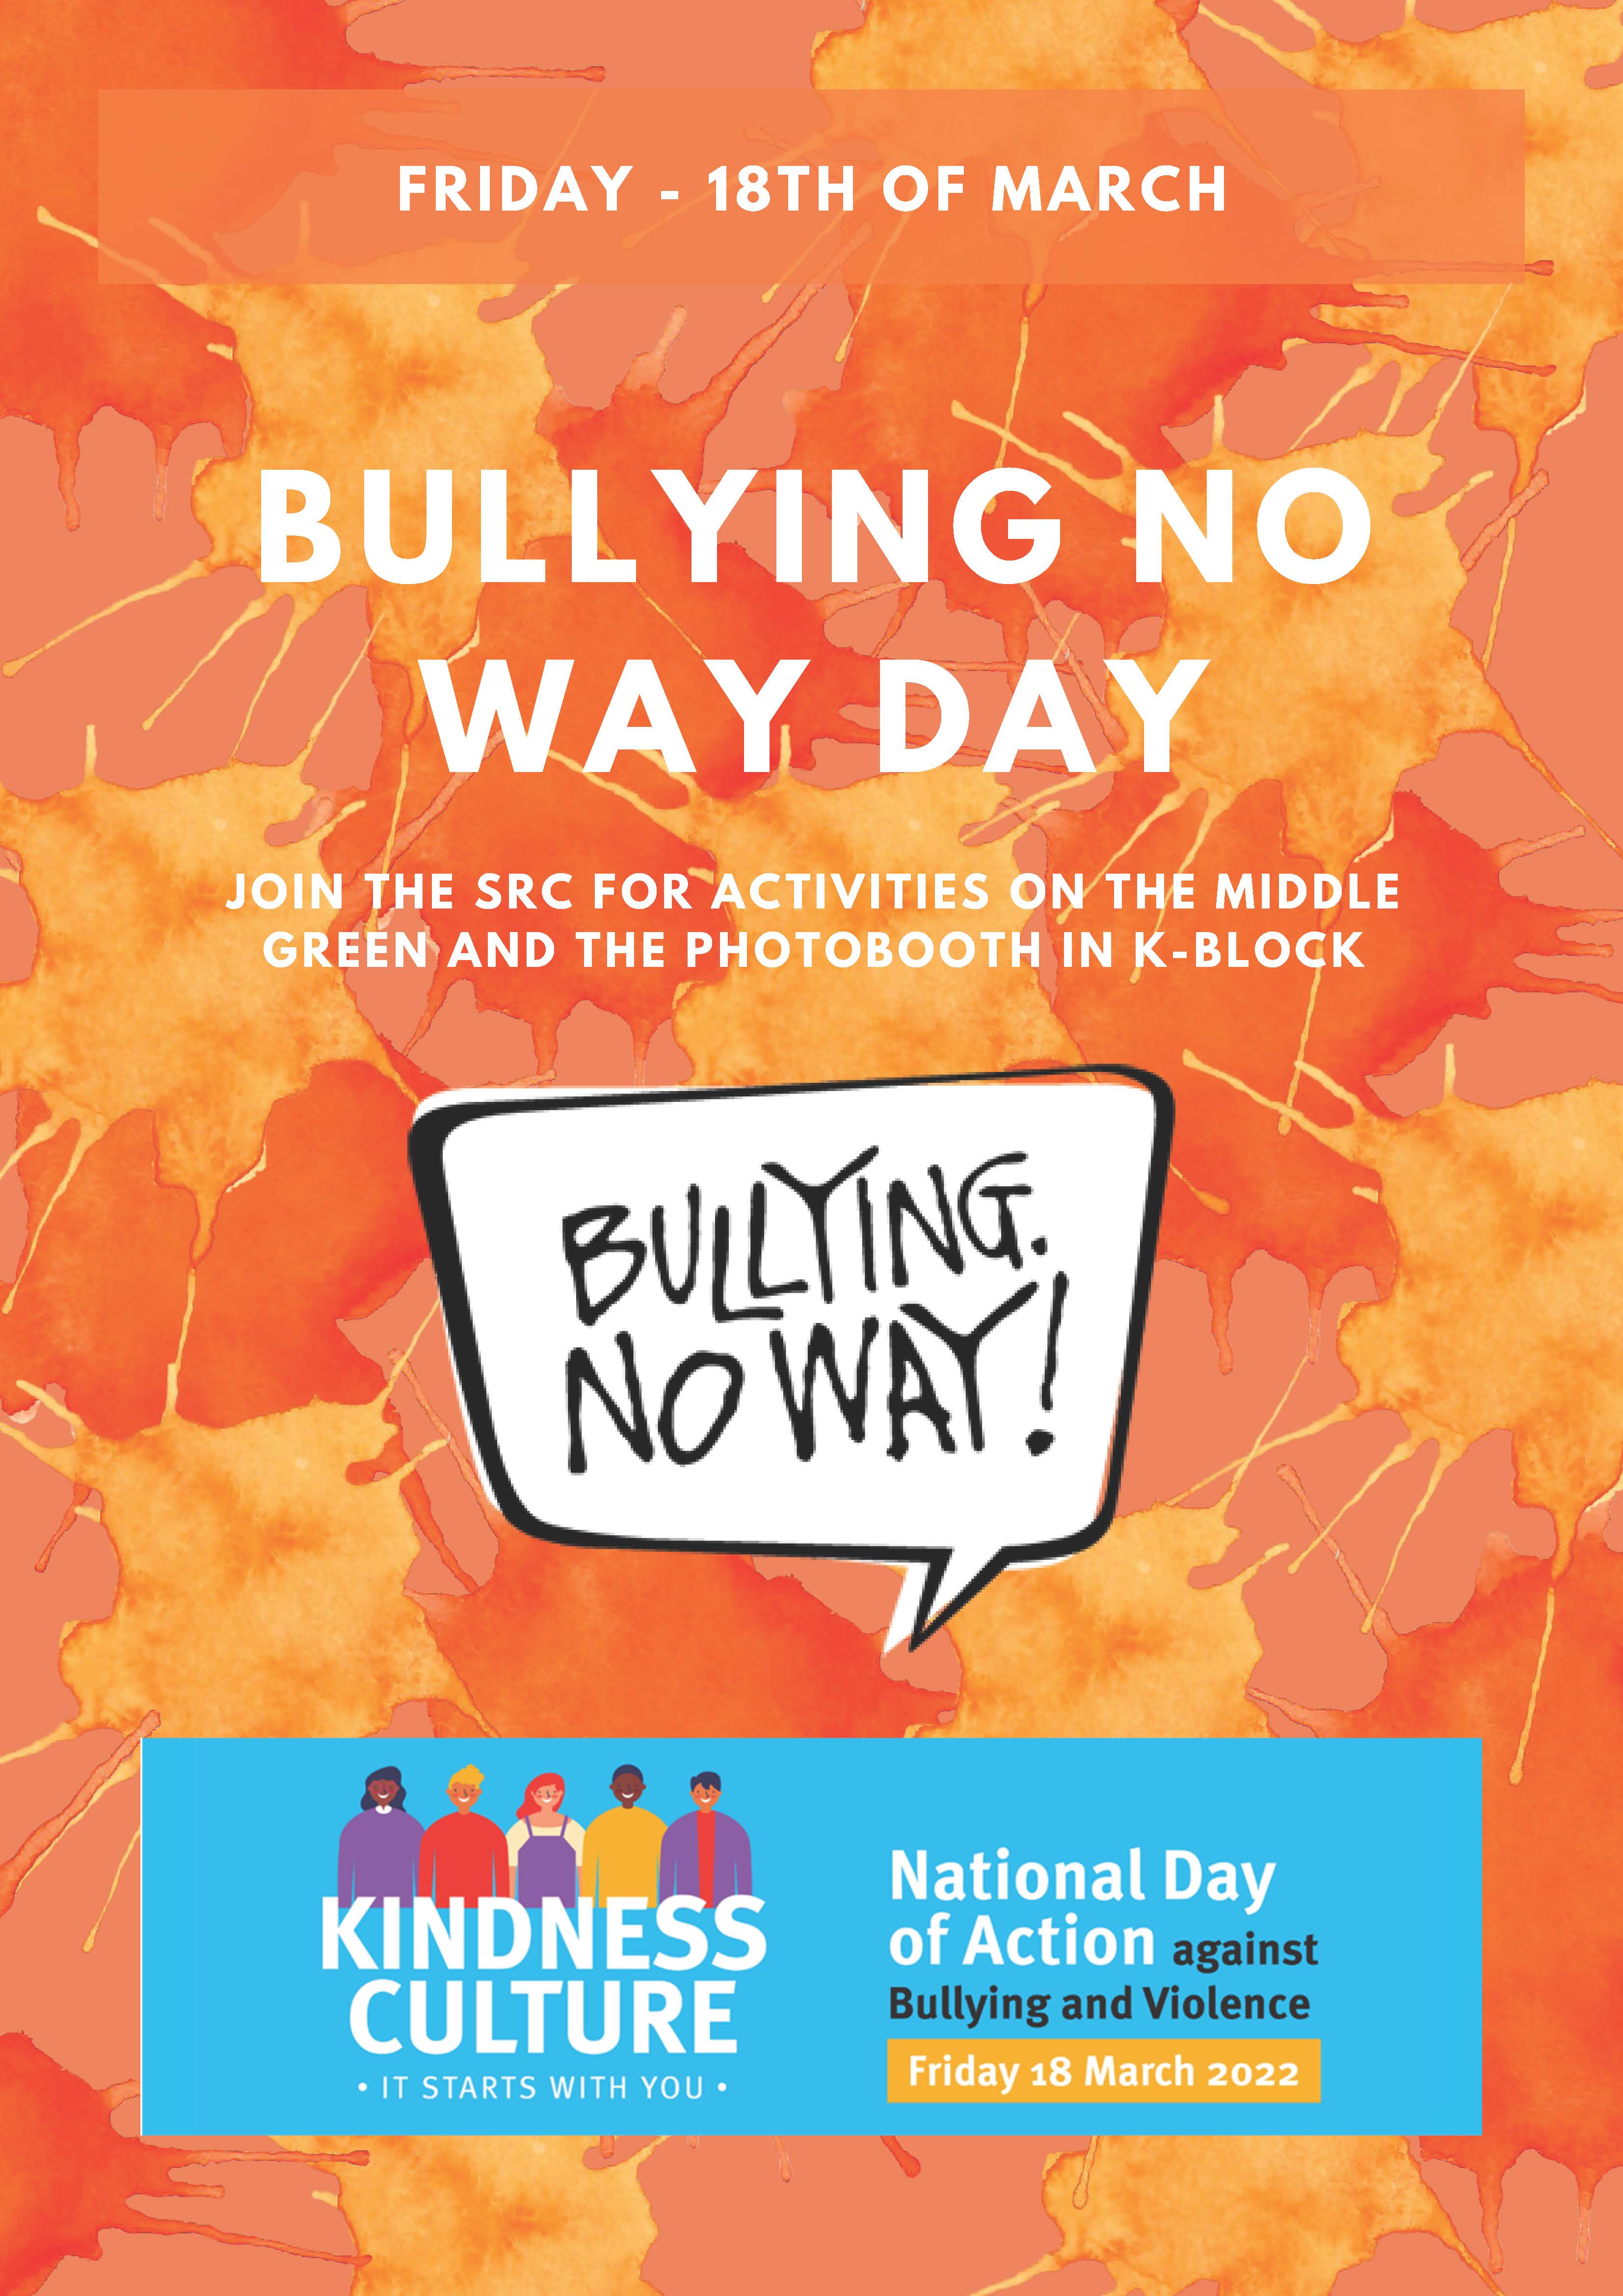 National Day of Action Against Bullying and Violence